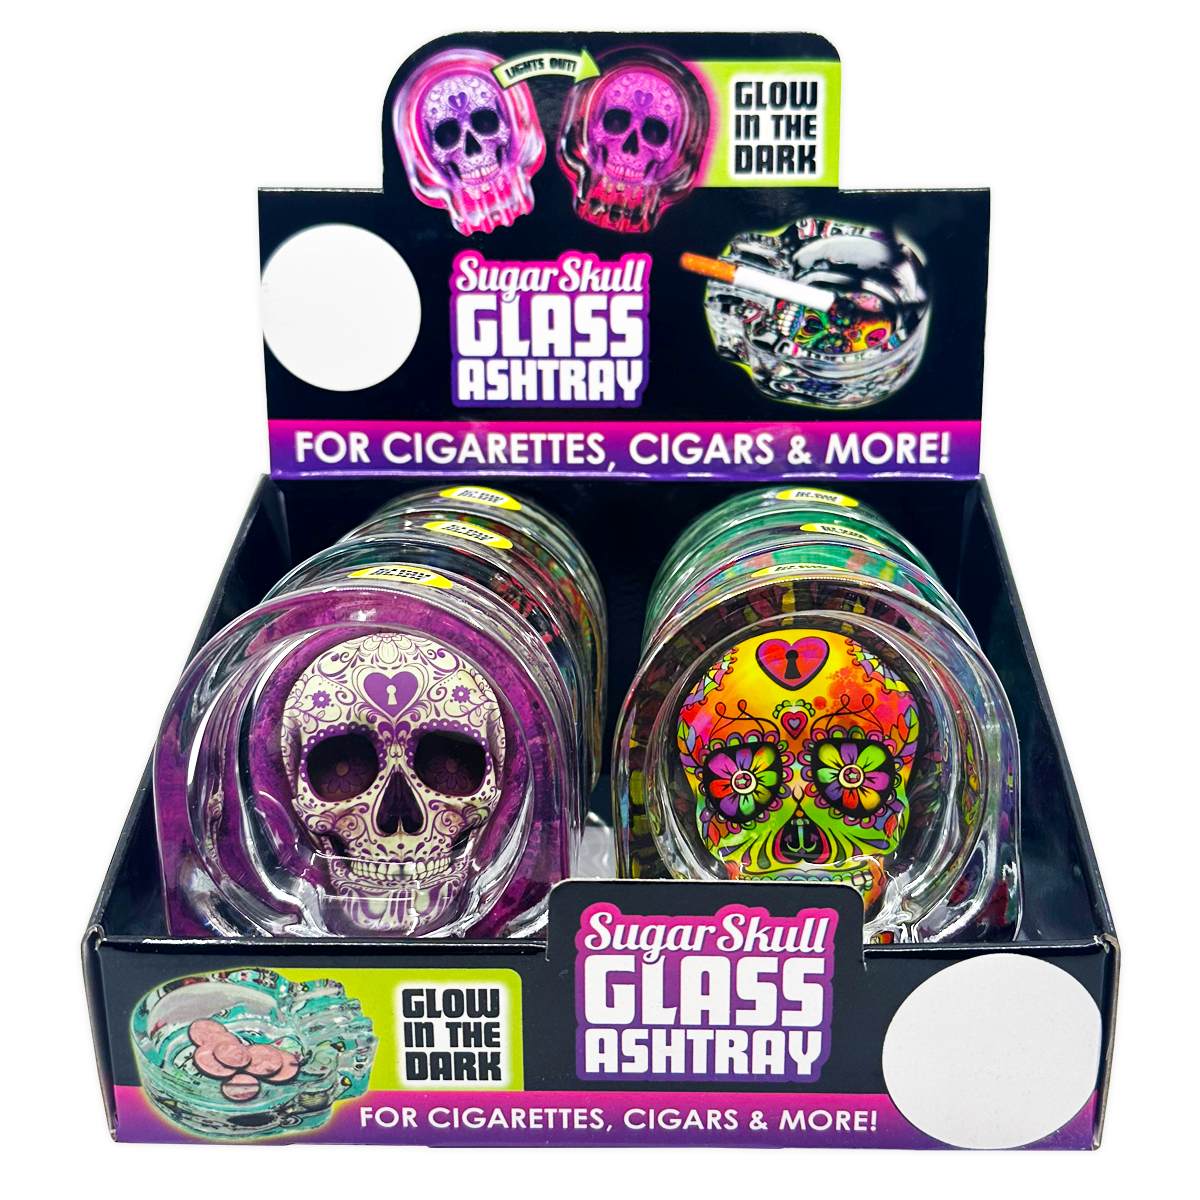 ITEM NUMBER 020120 SKULL GLASS ASHTRAY 6 PIECES PER DISPLAY